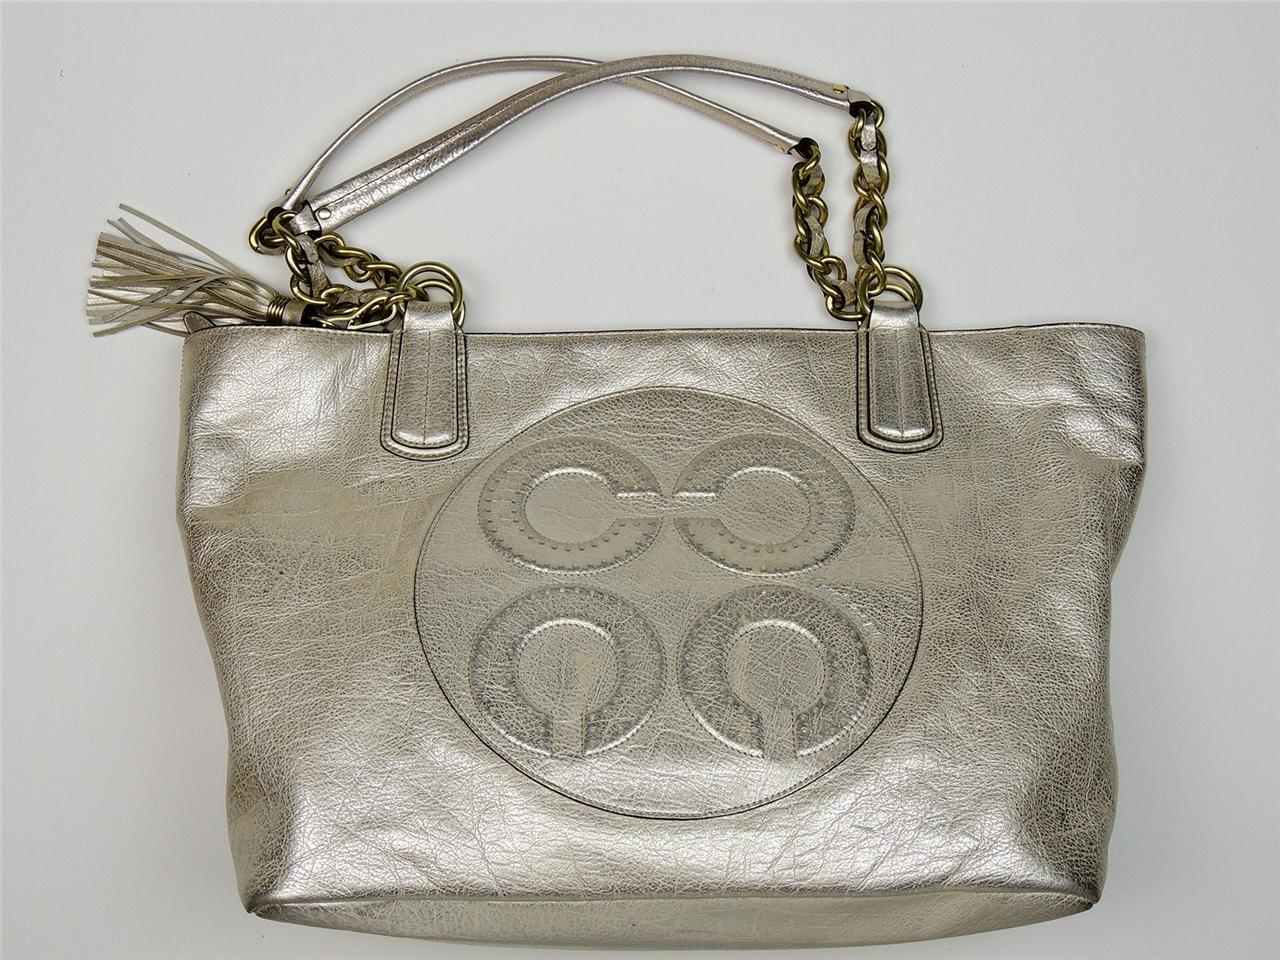 COACH LARGE BAG PURSE GOLD CHAIN STRAPS REALLY NICE! | eBay